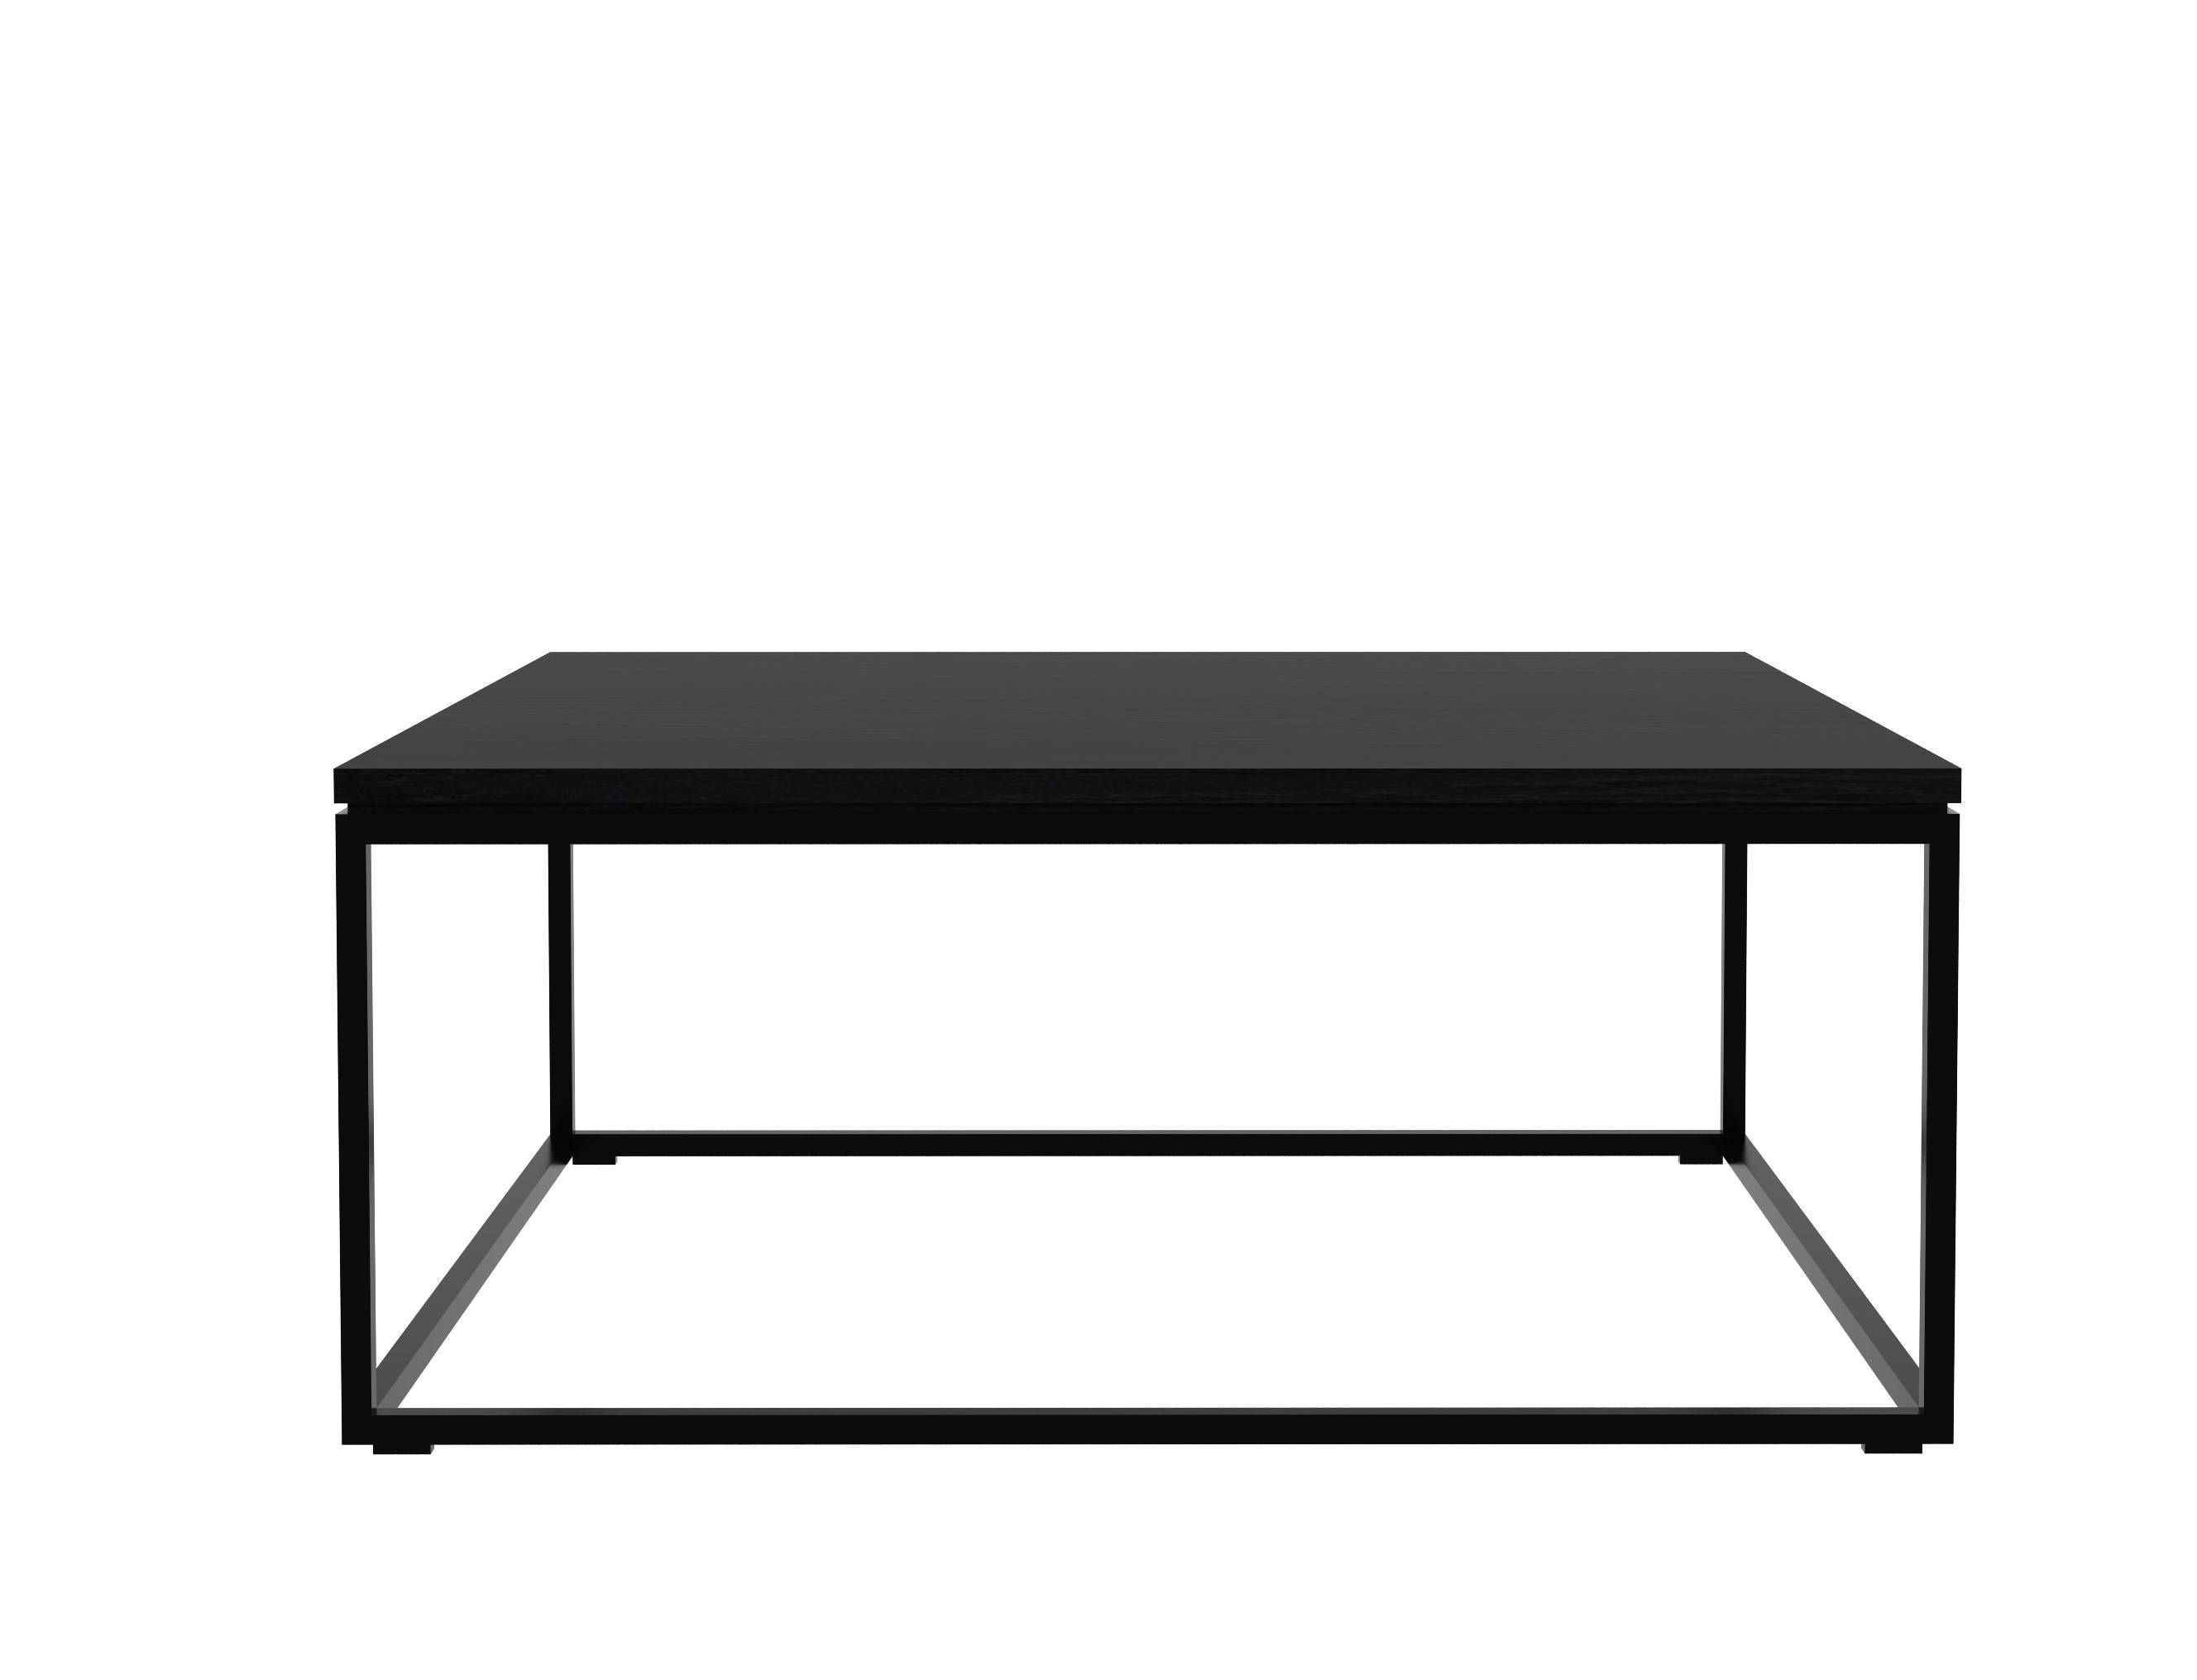 Ethnicraft Thin Coffee Table Black | Funktion Alley Throughout Thin Coffee Tables (Photo 9 of 30)